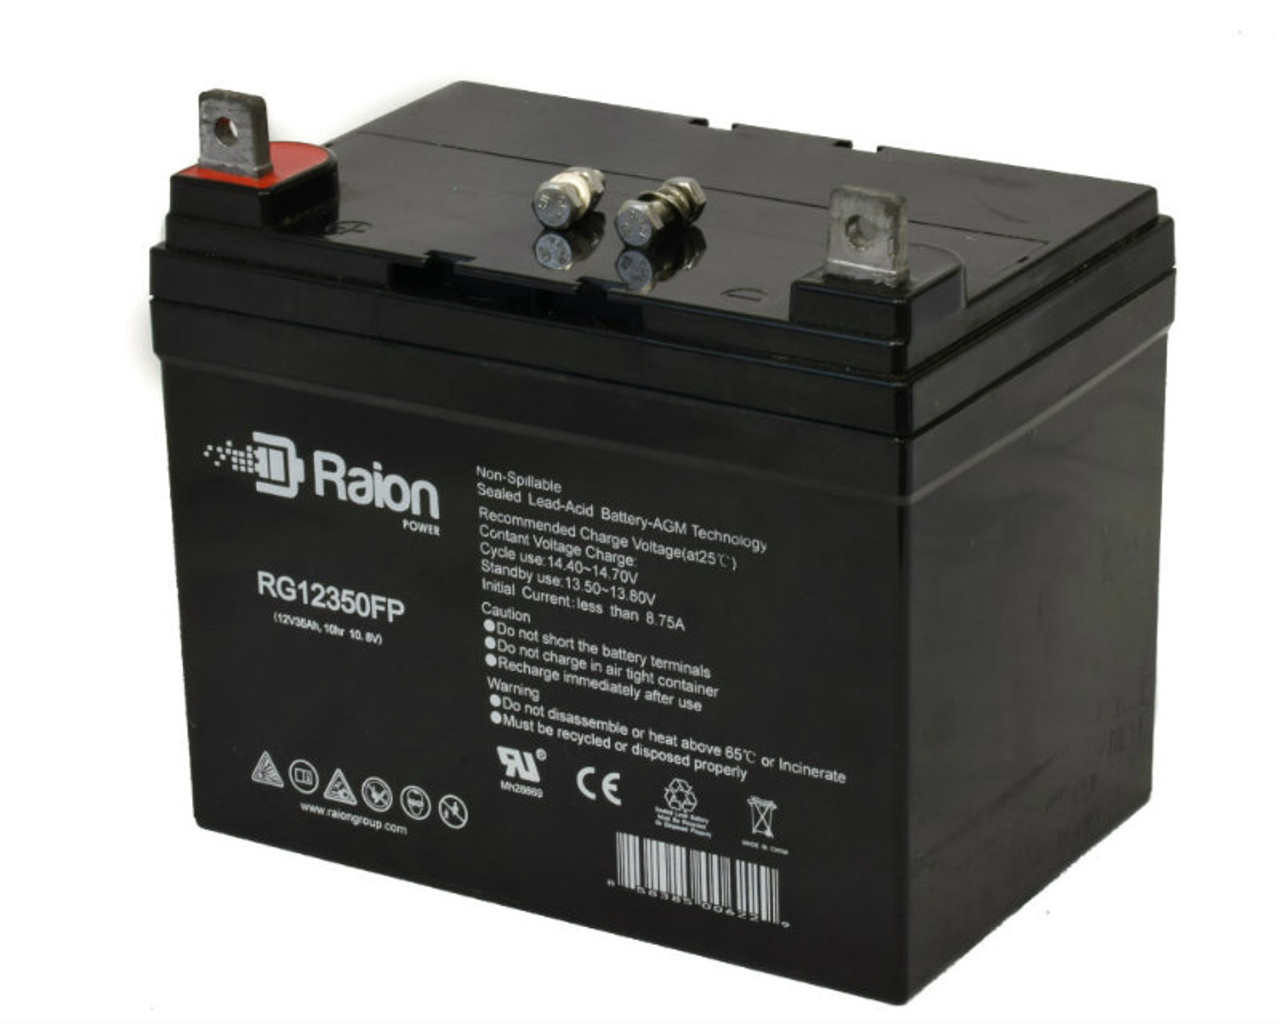 Raion Power Replacement 12V 35Ah Battery for Ingersol Equipment 4116 - 1 Pack